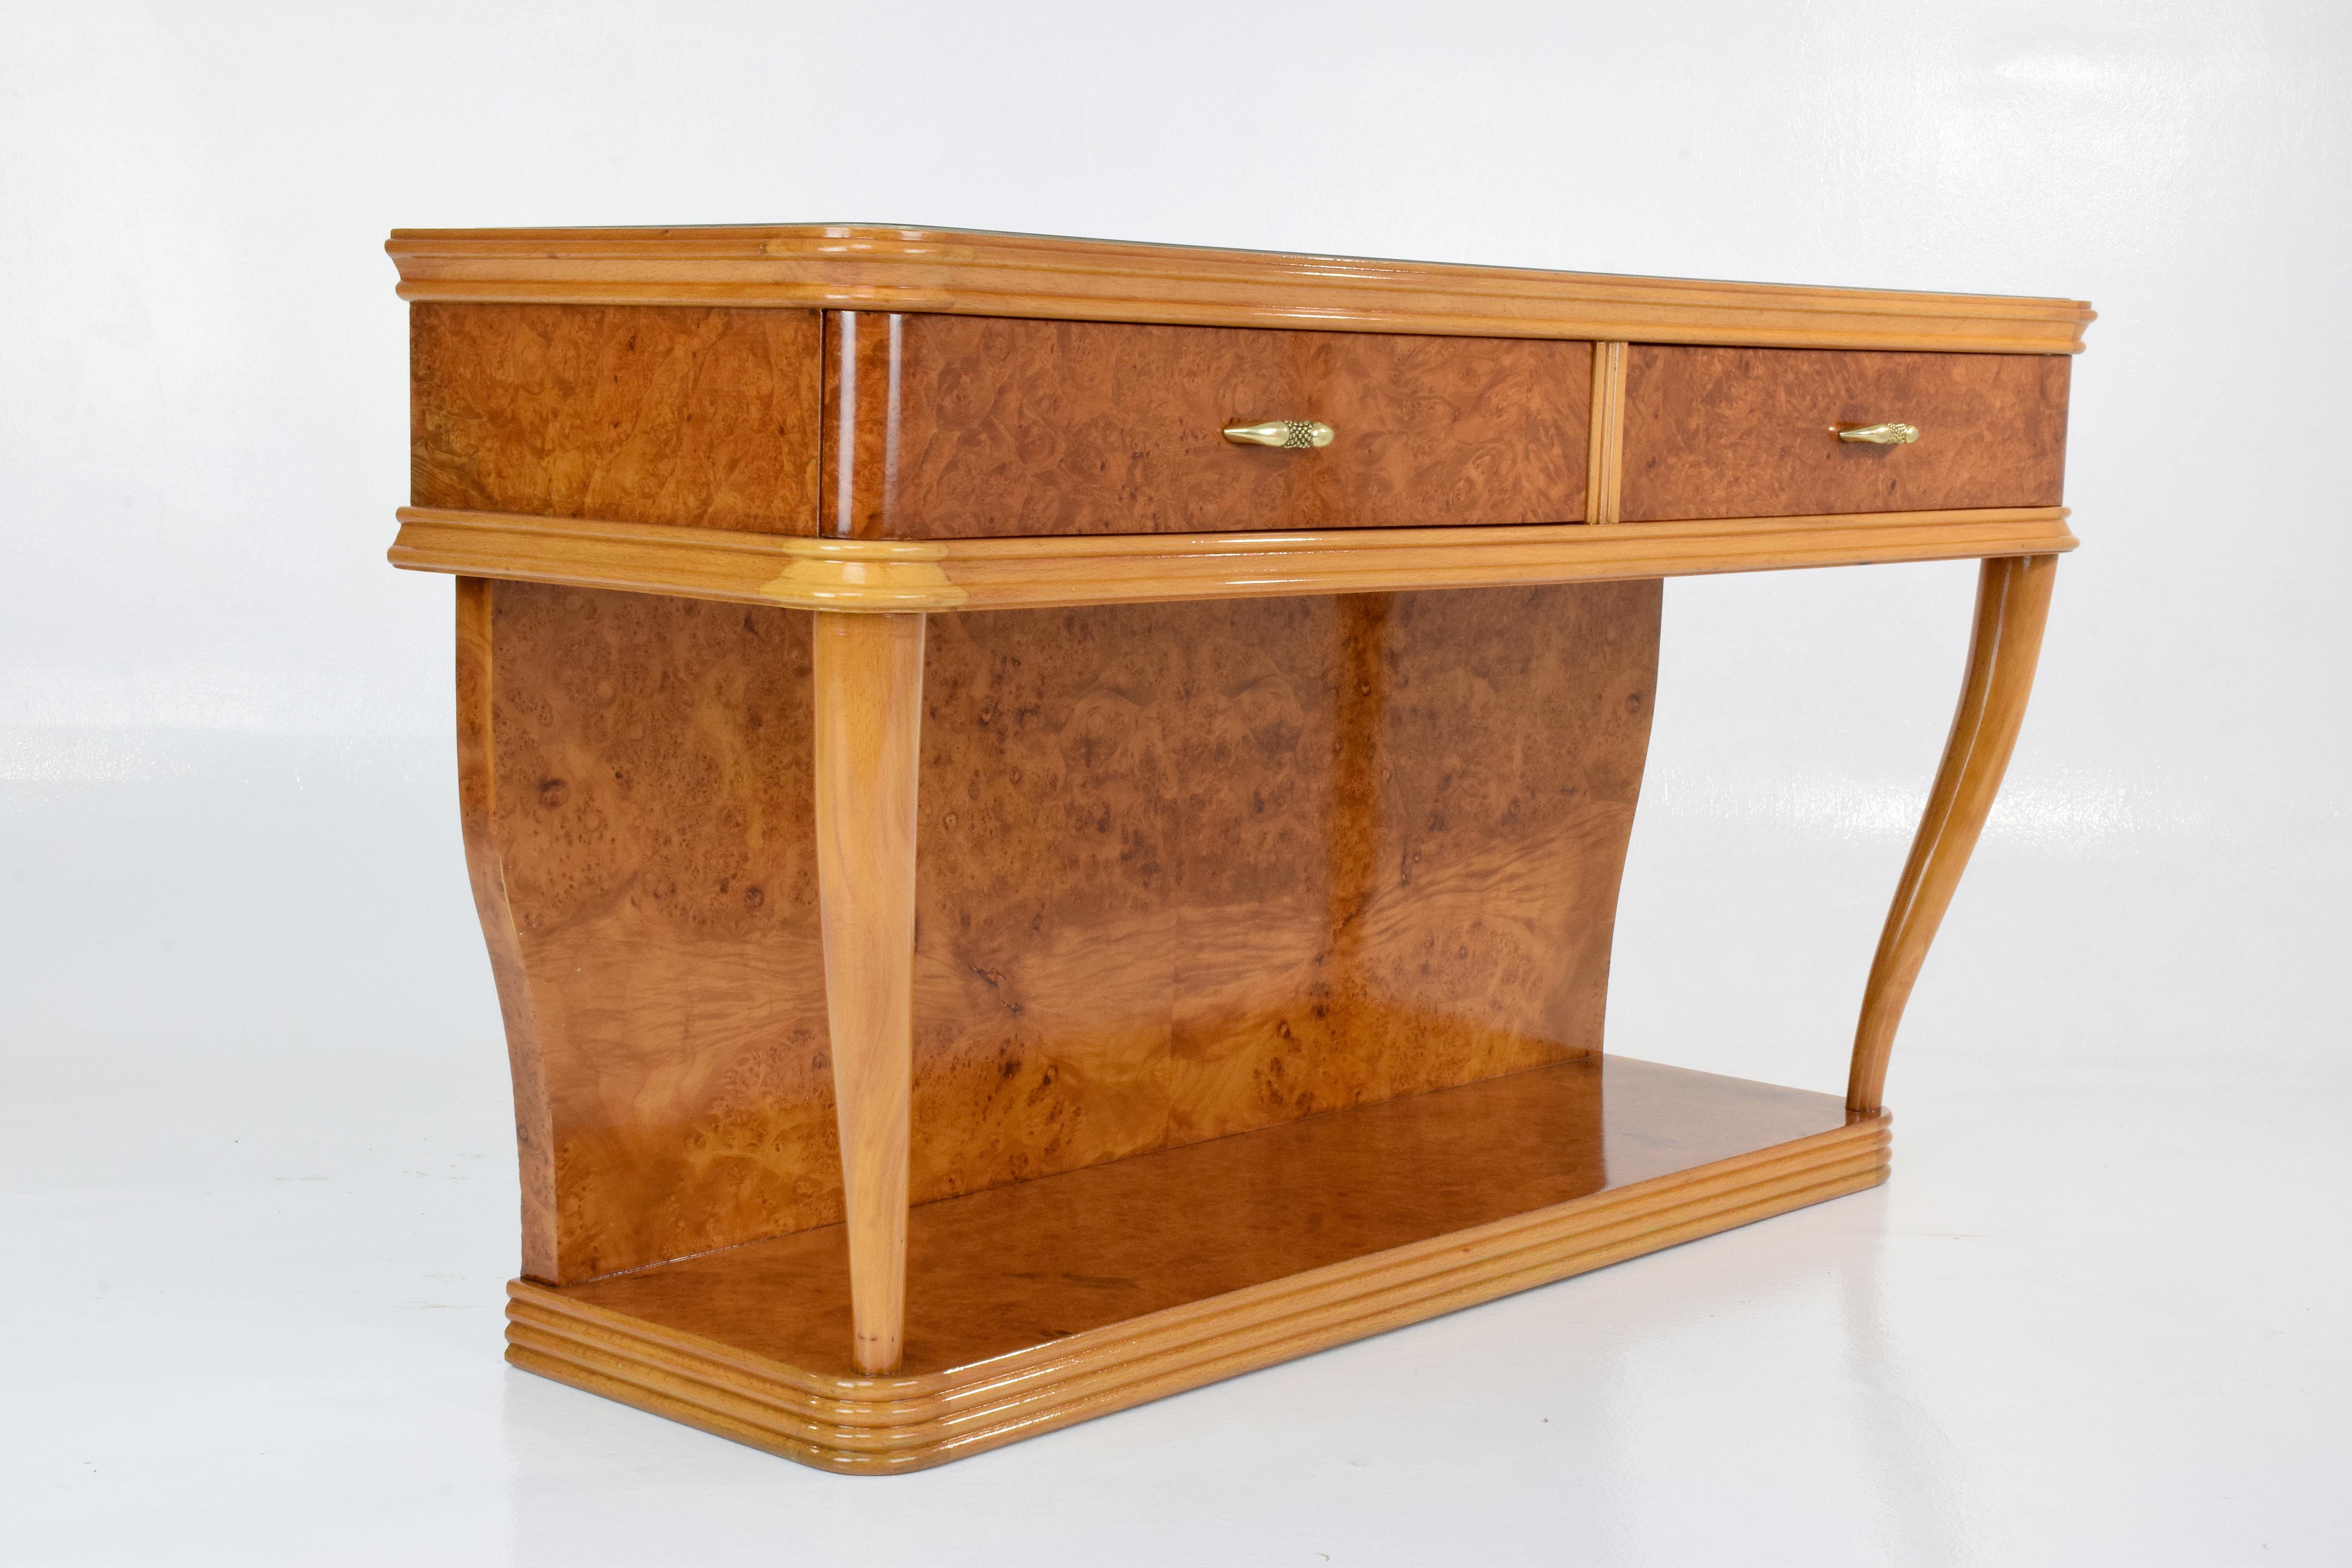 Mid-Century Italian art deco style dresser or vanity composed of bird's-eye maple veneer, beechwood frame, a glass tabletop with a sheath of colored paper underneath and a detachable vintage mirror. The console has two drawers with solid brass